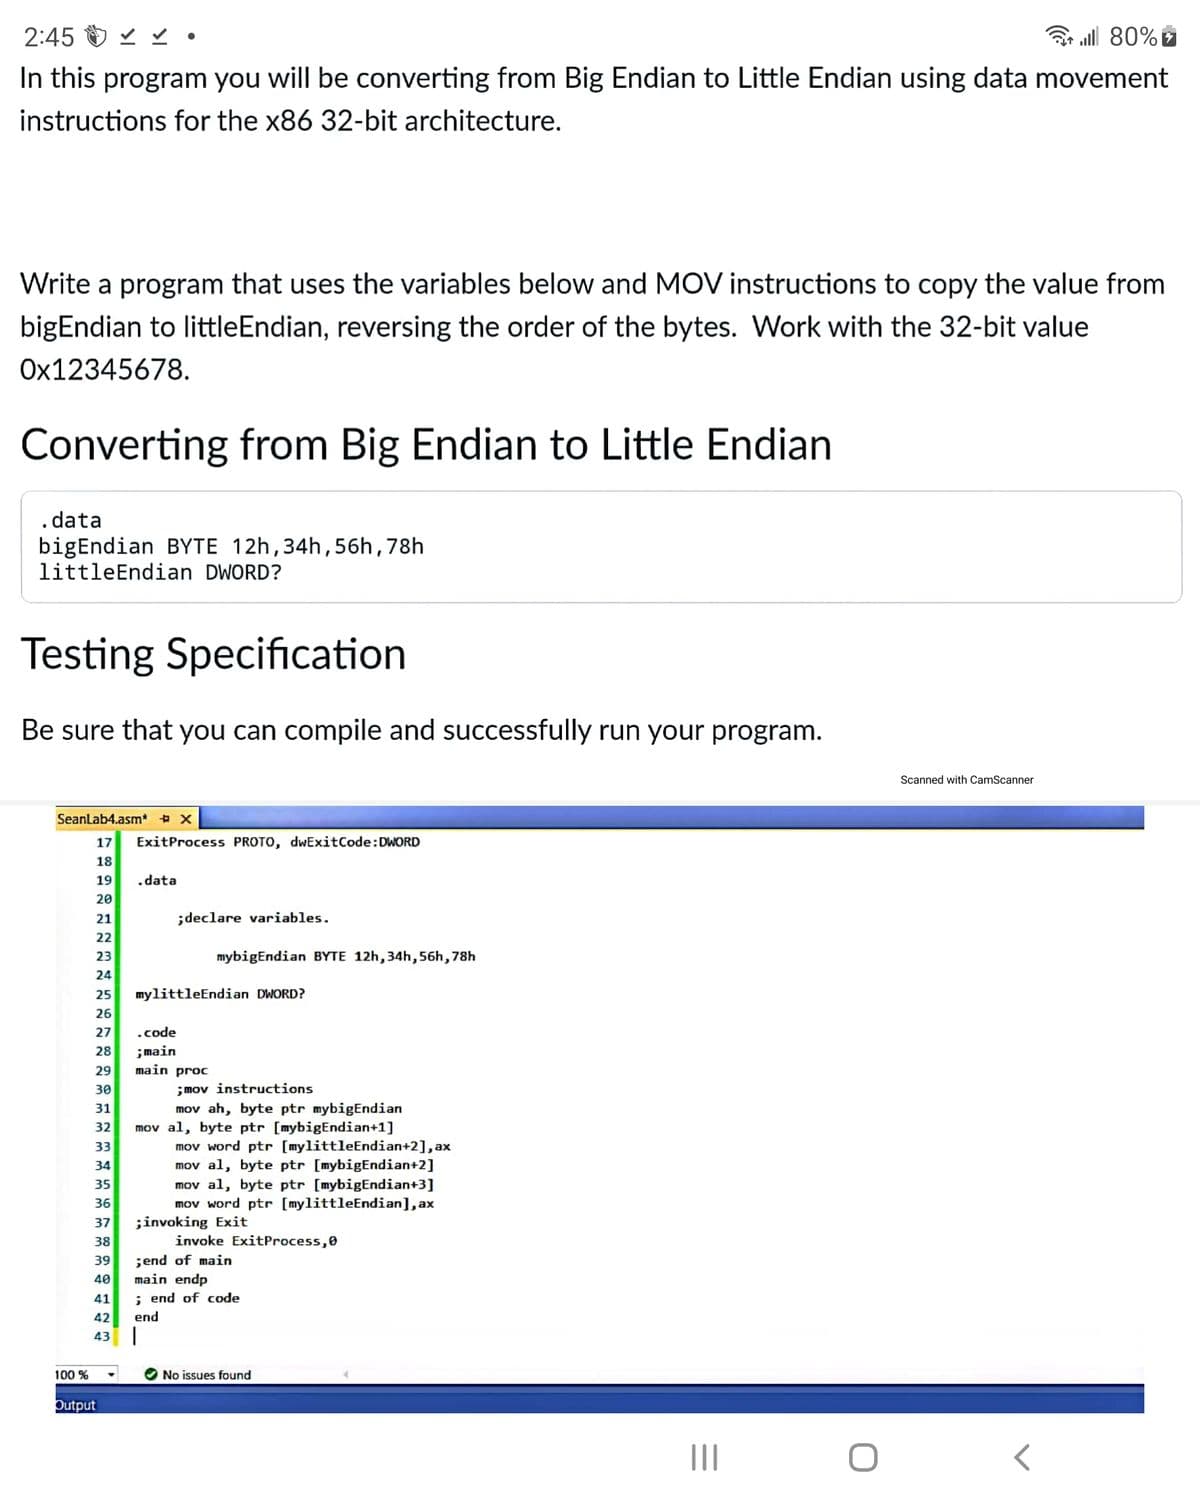 2:45 O v v •
3 all 80% e
In this program you will be converting from Big Endian to Little Endian using data movement
instructions for the x86 32-bit architecture.
Write a program that uses the variables below and MOV instructions to copy the value from
bigEndian to littleEndian, reversing the order of the bytes. Work with the 32-bit value
Ox12345678.
Converting from Big Endian to Little Endian
. data
bigEndian BYTE 12h,34h,56h,78h
littleEndian DWORD?
Testing Specification
Be sure that you can compile and successfully run your program.
Scanned with CamScanner
SeanLab4.asm* + x
17
ExitProcess PROTO, dwExitCode:DWORD
18
19
.data
20
21
;declare variables.
22
23
mybigEndian BYTE 12h,34h,56h,78h
24
25
mylittleEndian DWORD?
26
27
.code
;main
main proc
28
29
;mov instructions
mov ah, byte ptr mybigEndian
mov al, byte ptr [mybigEndian+1]
mov word ptr [mylittleEndian+2], ax
mov al, byte ptr [mybigEndian+2]
mov al, byte ptr [mybigEndian+3]
mov word ptr [mylittleEndian], ax
;invoking Exit
30
31
32
33
34
35
36
37
38
invoke ExitProcess,0
;end of main
main endp
; end of code
39
40
41
42
end
43
100 %
No issues found
Output
II
